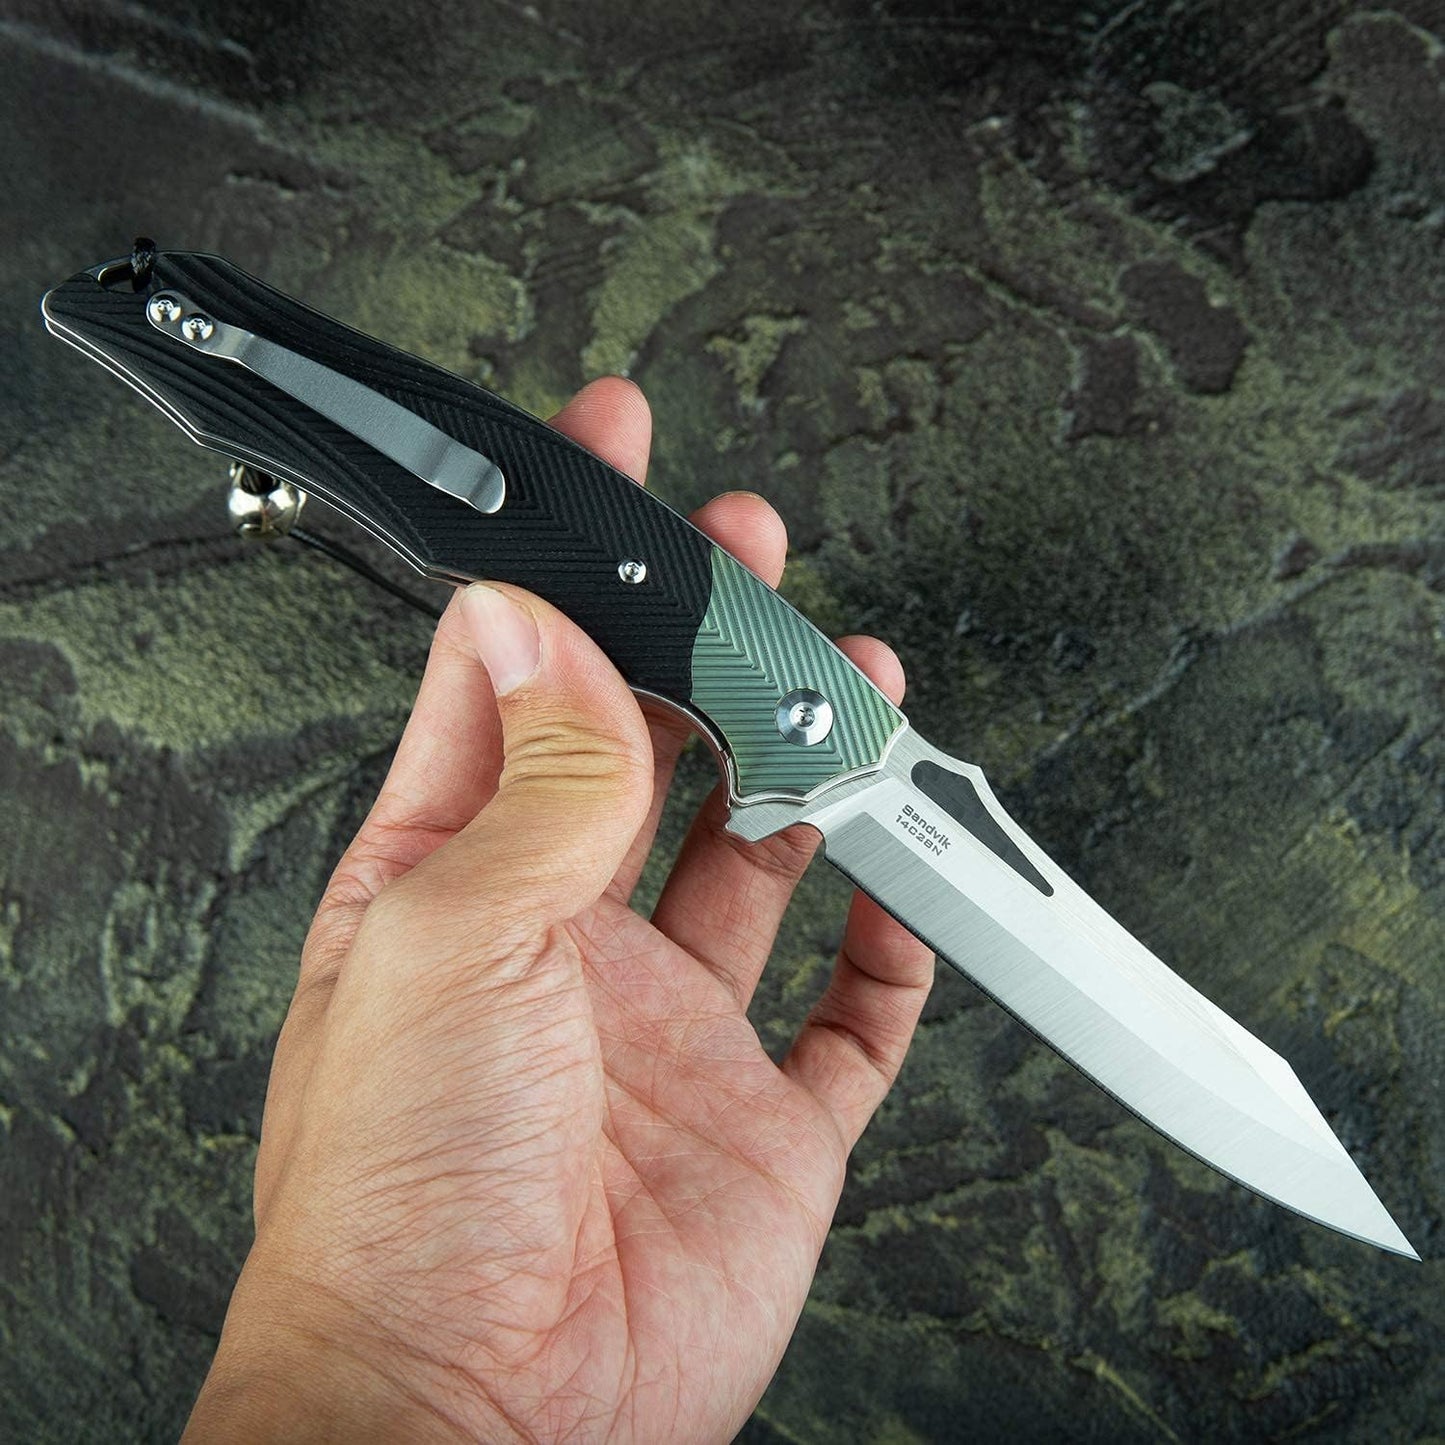 KD Folding Pocket Knife Titanium and G10 Handle Knives for Camping